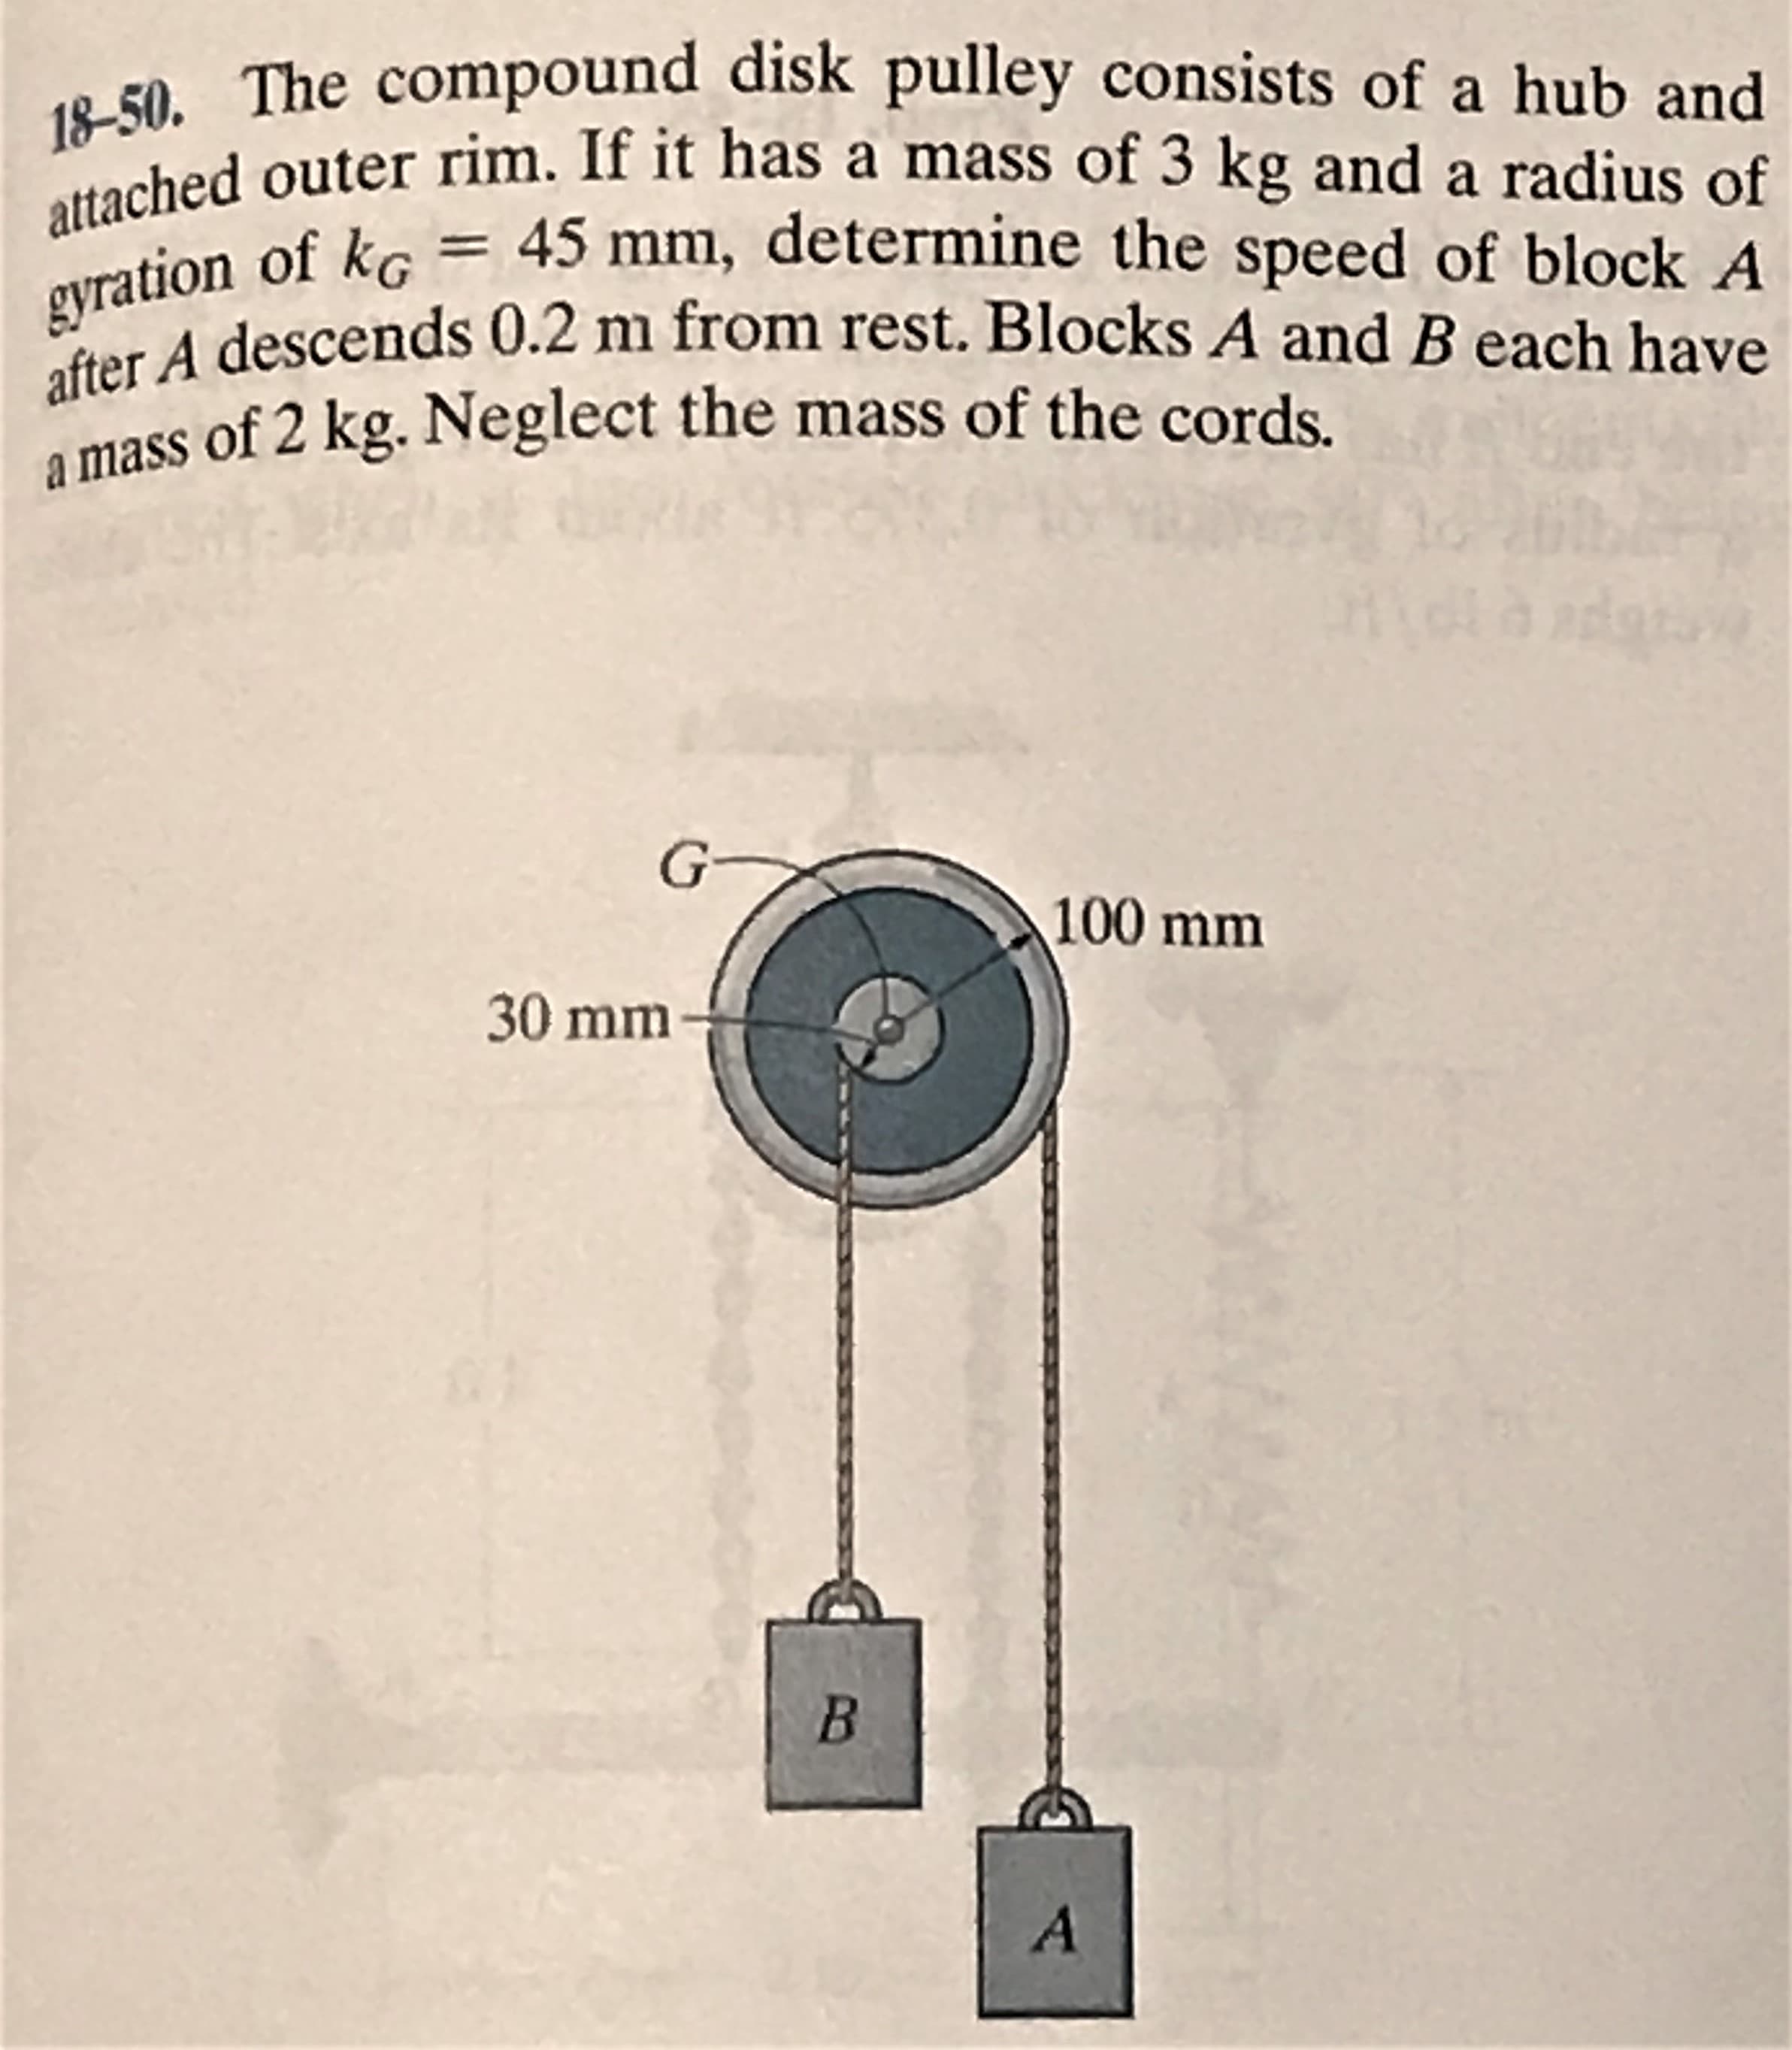 18-50. The compound disk pulley consists of a hub and
attached outer rim. If it has a mass of 3 kg and a radius of
45 mm, determine the speed of block A
gyration of ko
after A descends 0.2 m from rest. Blocks A and B each have
a mass of 2 kg. Neglect the mass of the cords.
G
100 mm
30 mm
41
